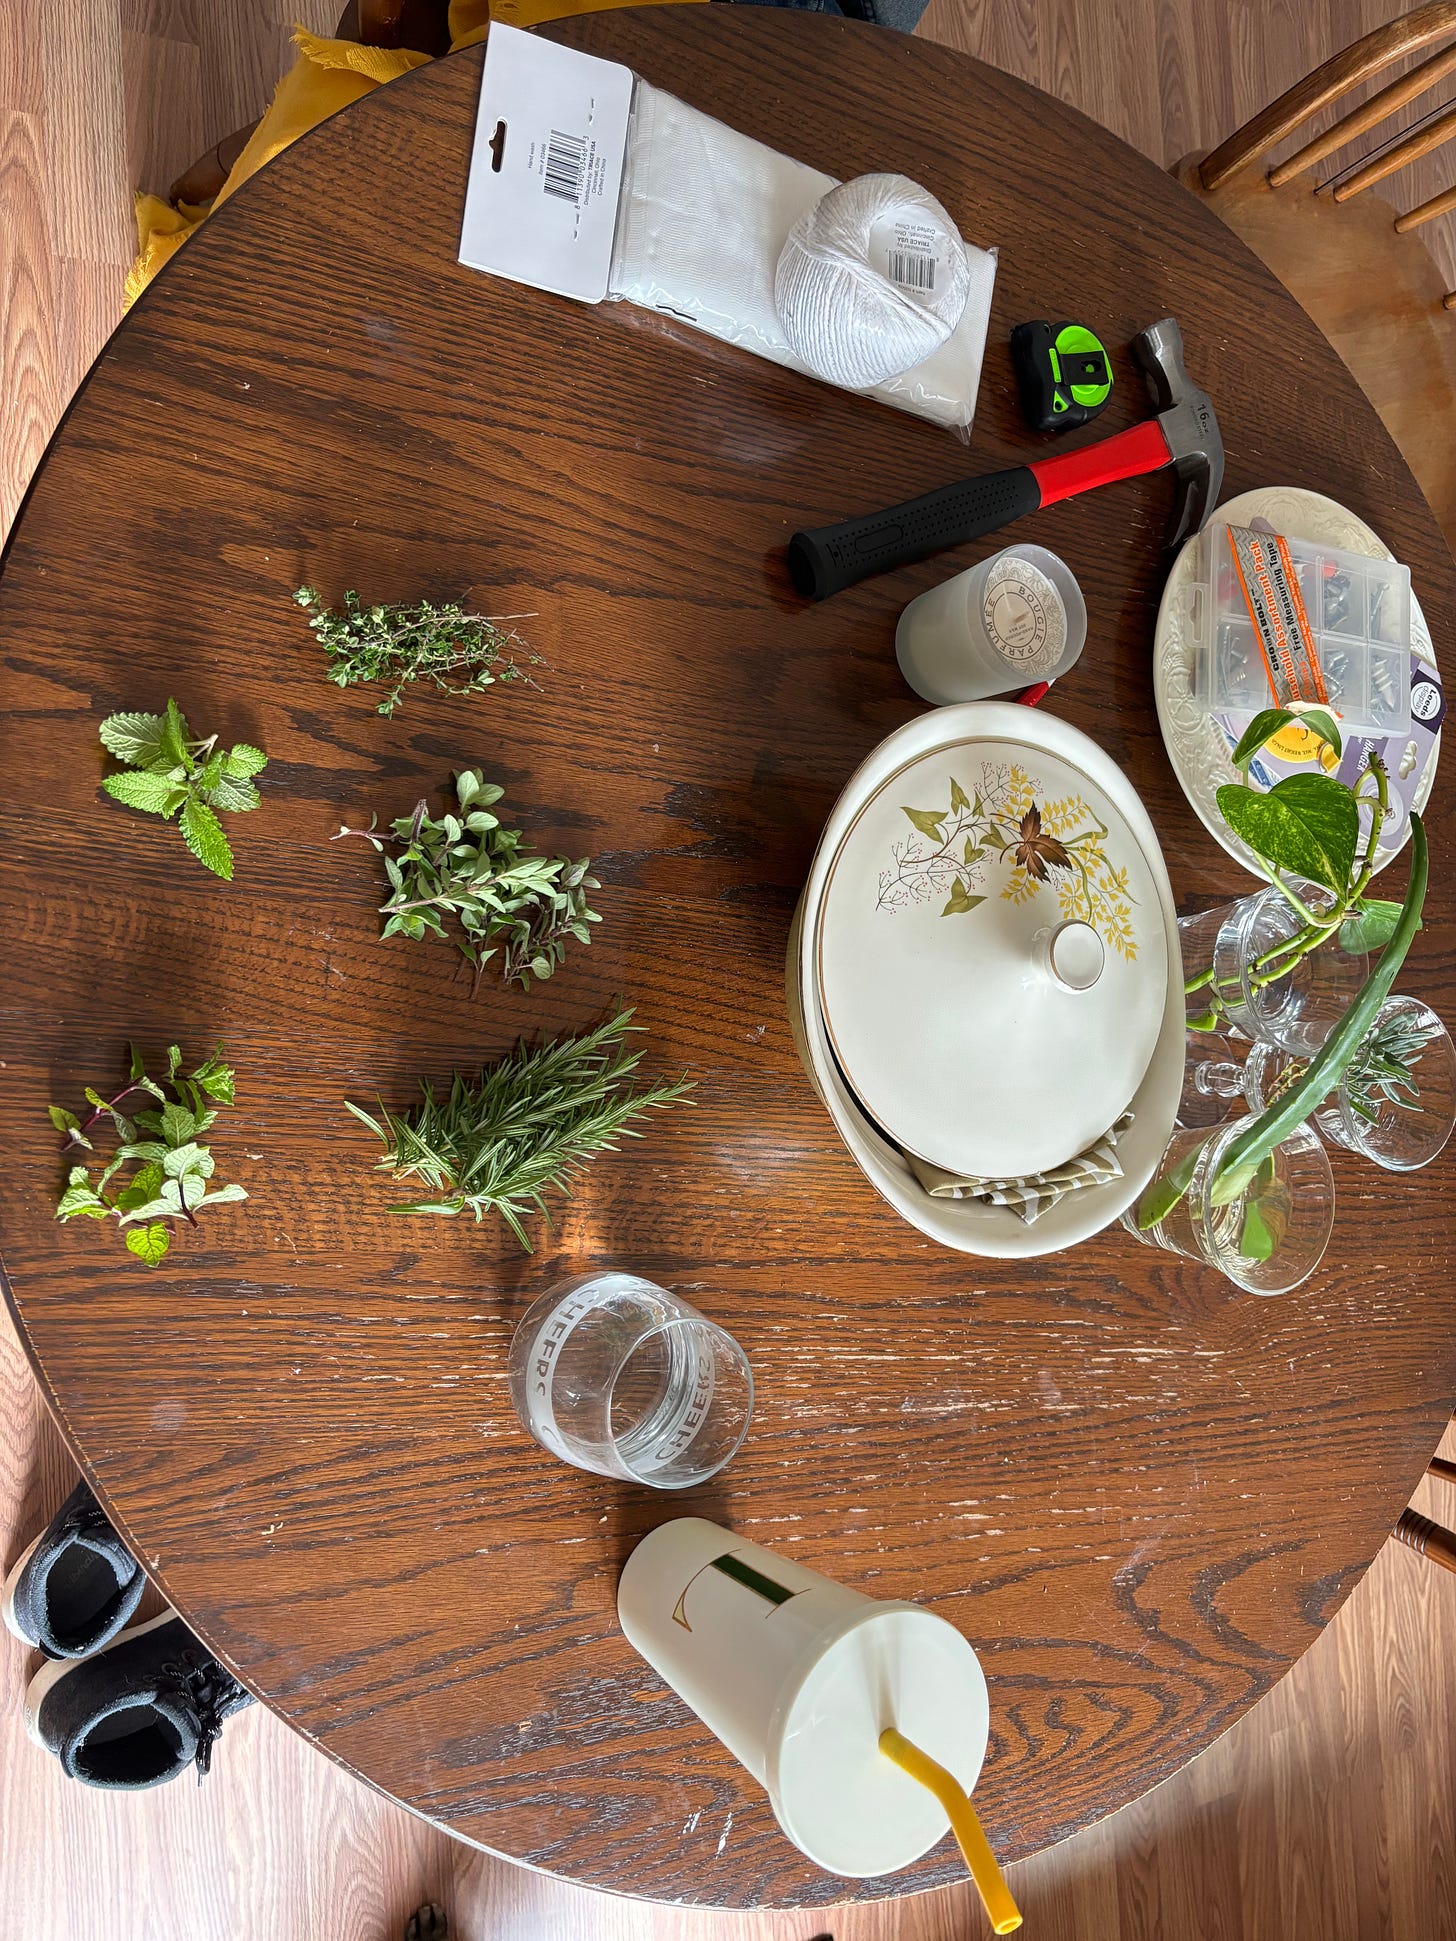 A circular wooden table has cut herbs, twine, plants propagating, a hammer and measuring tape, and several water glasses